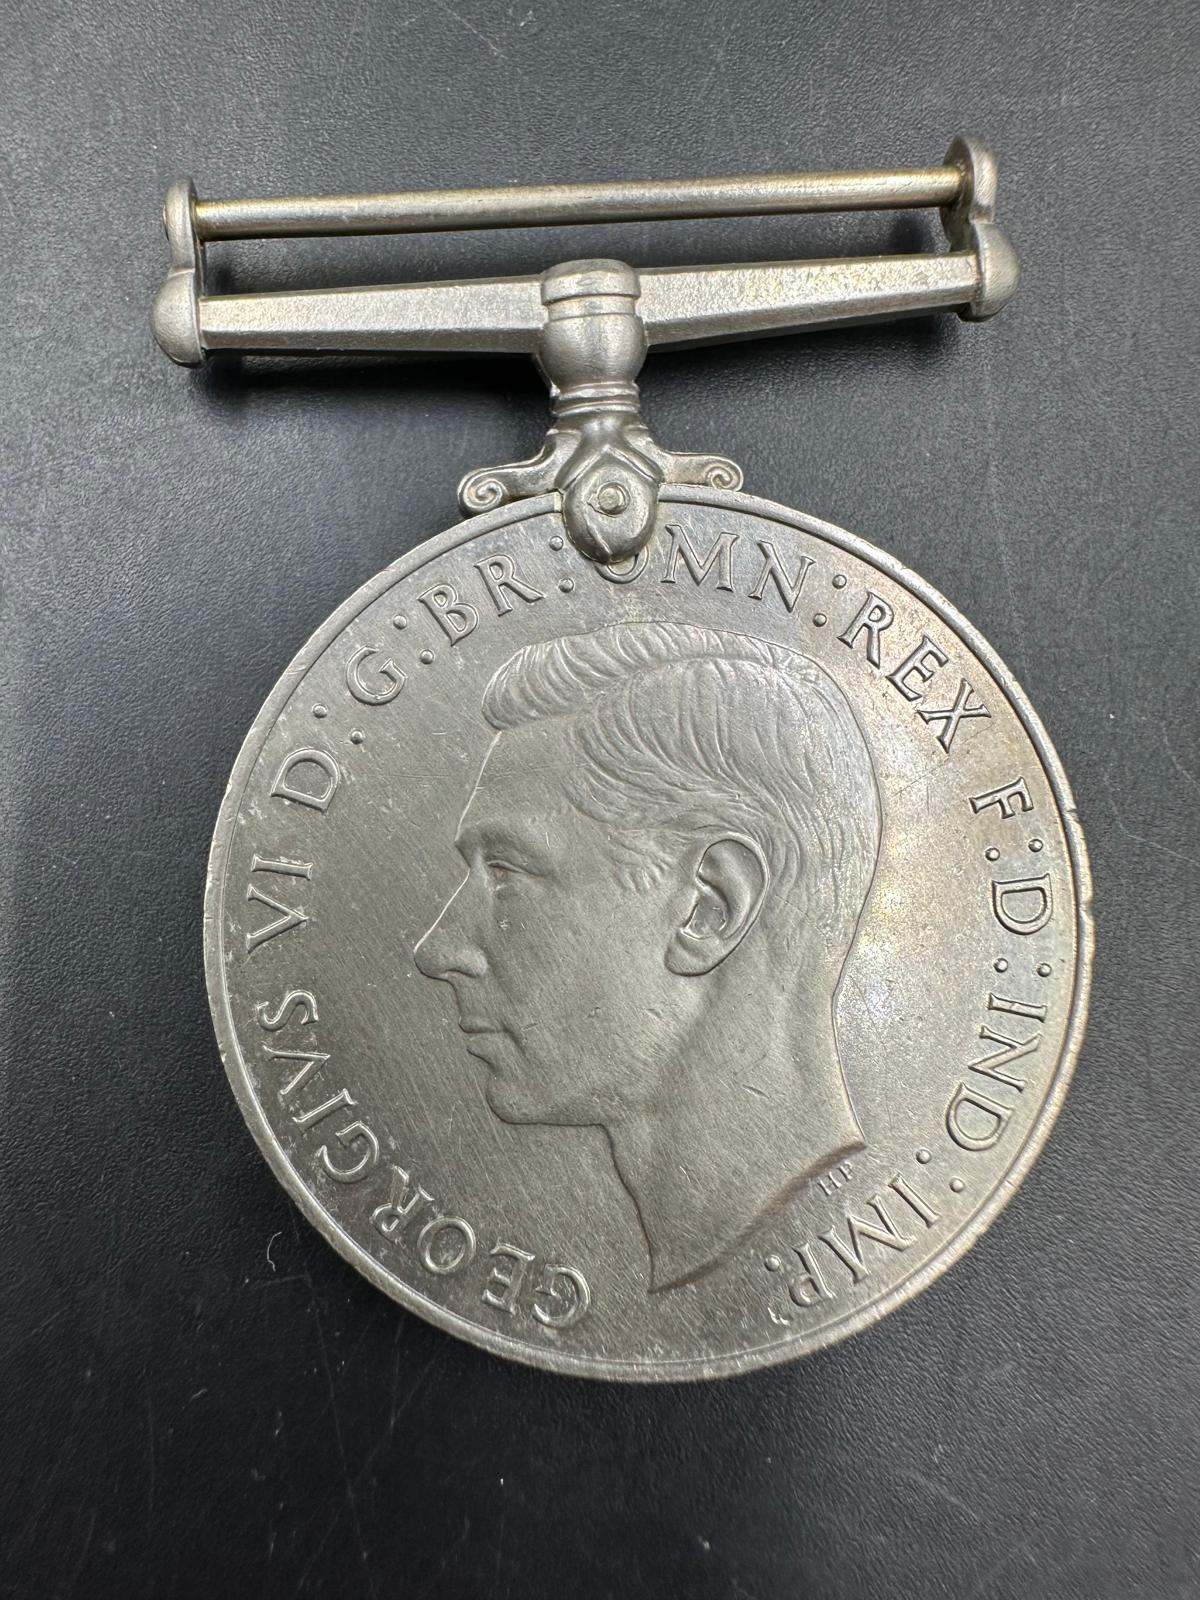 Militaria: WWII Defence Medal, WWI Great War Medal 102418 DVR T G Wilson, RA and a 1914-1918 medal 2 - Image 3 of 4